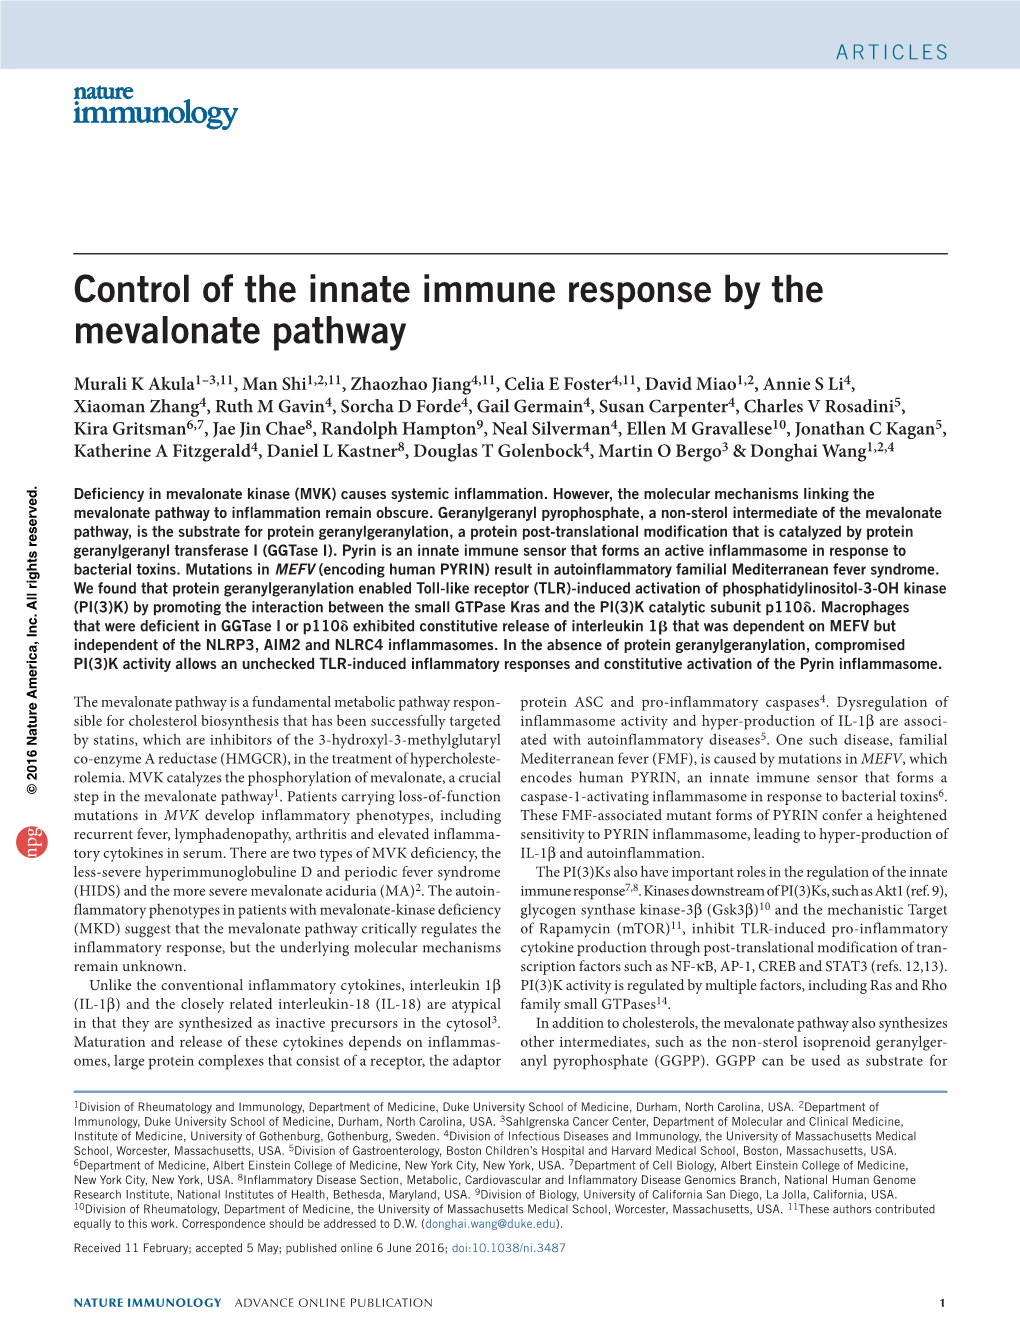 Control of the Innate Immune Response by the Mevalonate Pathway